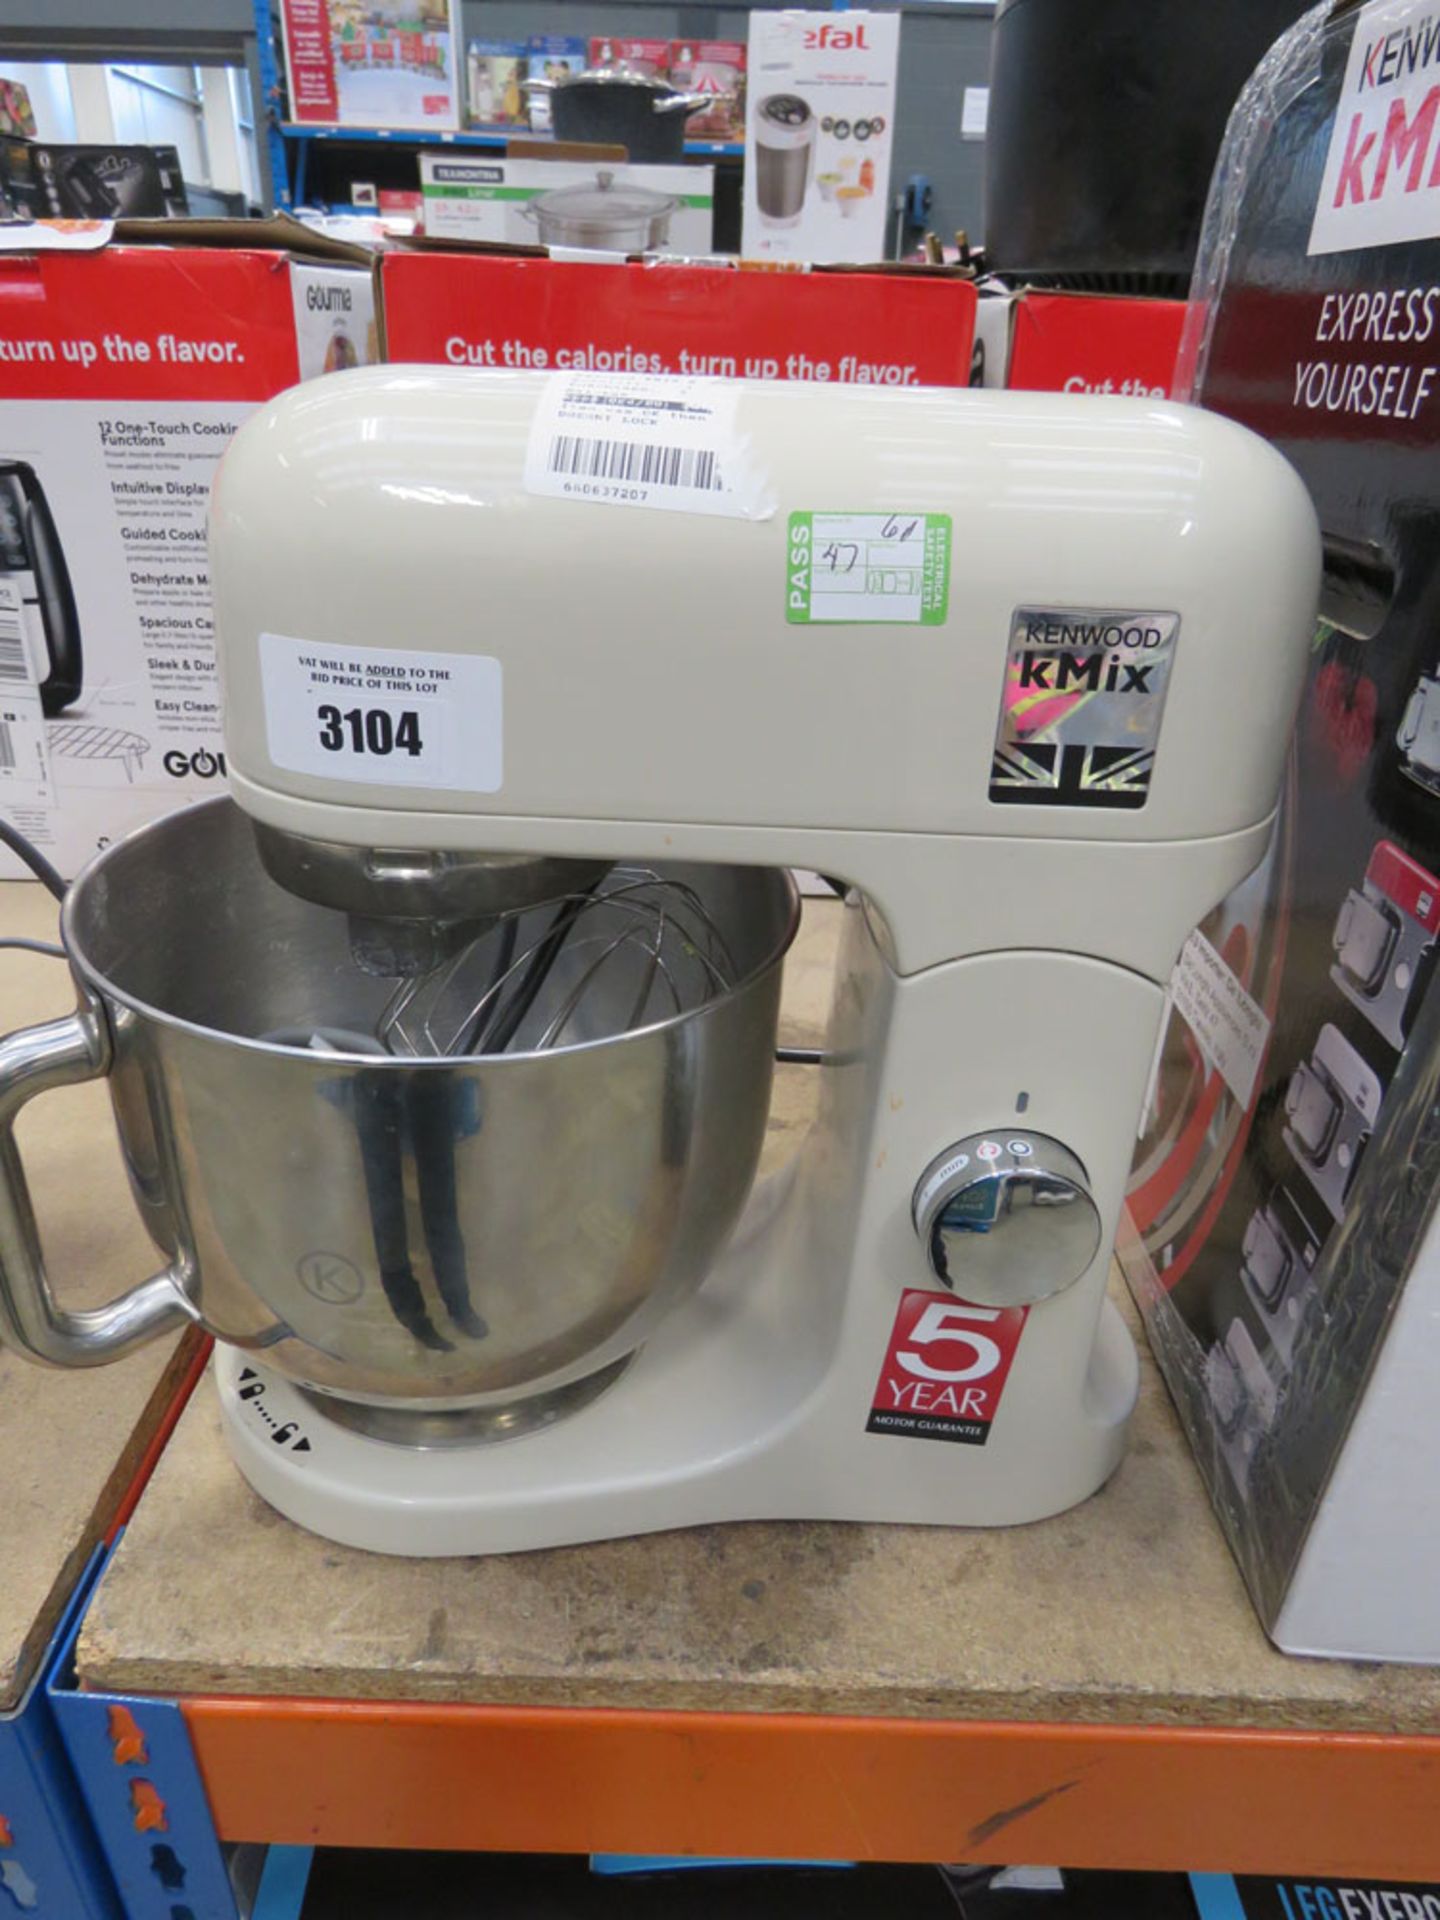 (TN60) Unboxed Kenwood K Mix standing mixer with 2 attachments